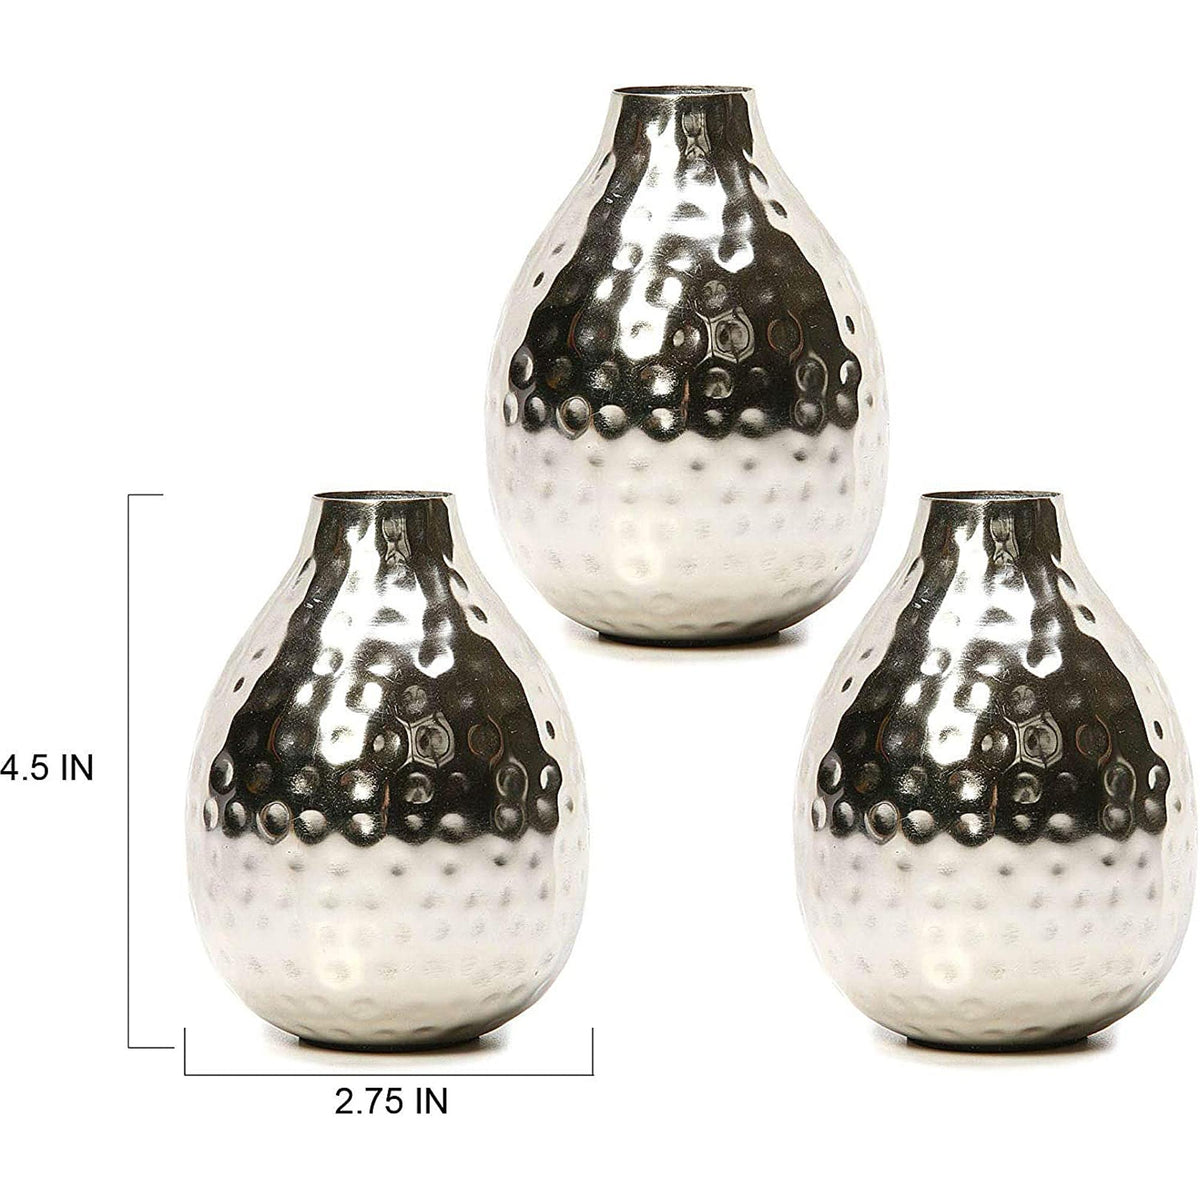 HOSLEY®  Metal Bud Vases Set,  Silver finish,  Set of 3,  4.5 inches High